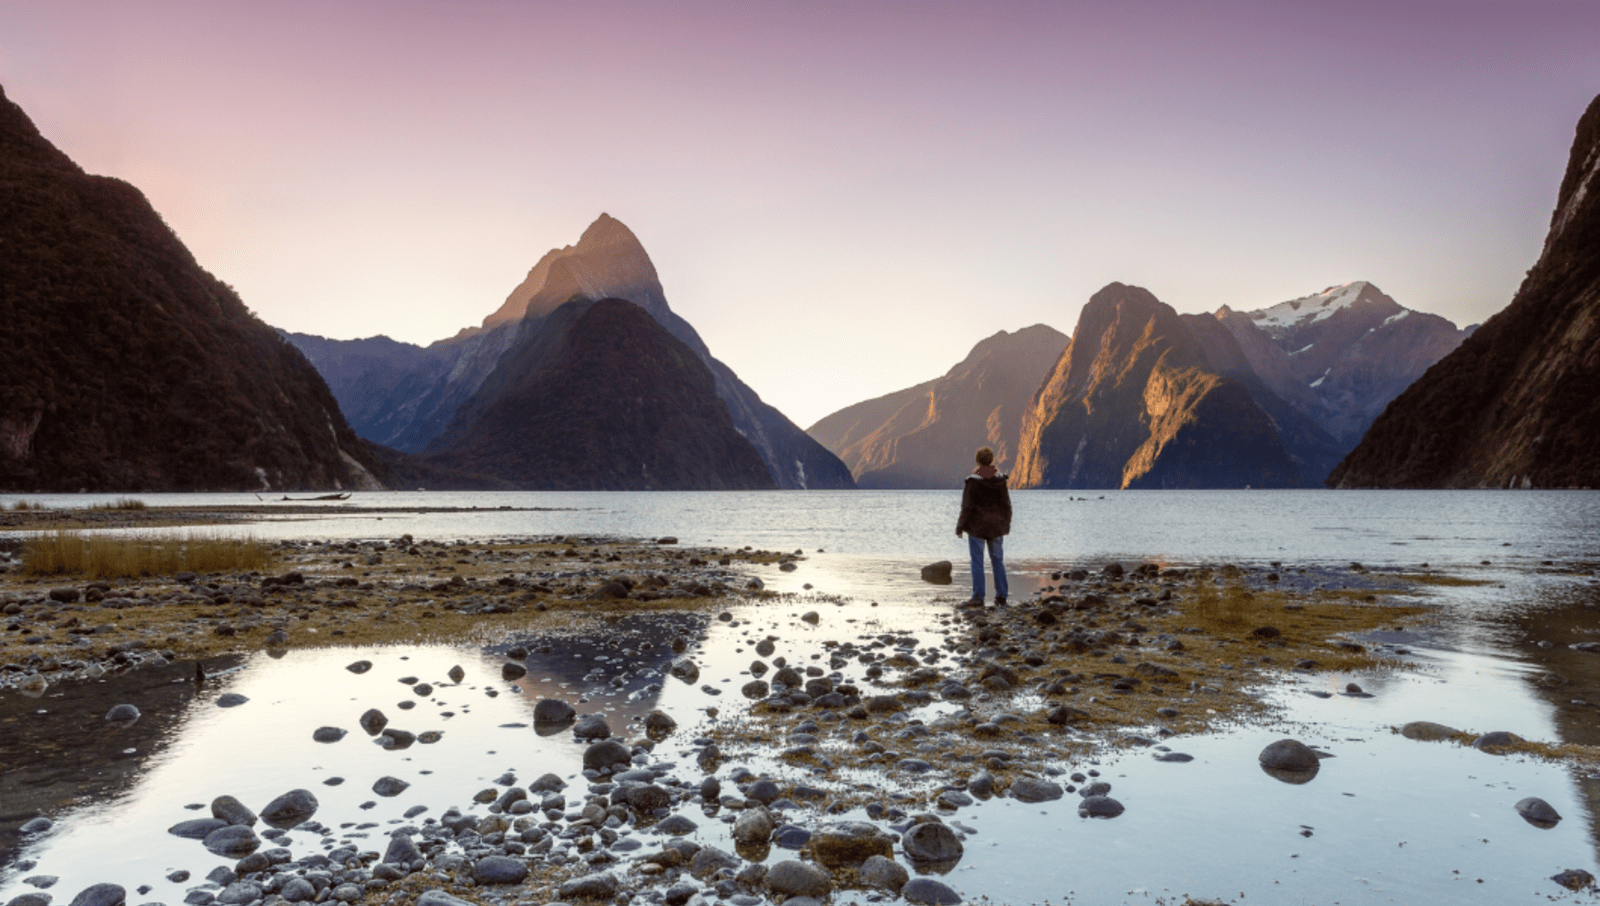 Person standing on rocks on the shore of a lake, looking at mountains across the lake